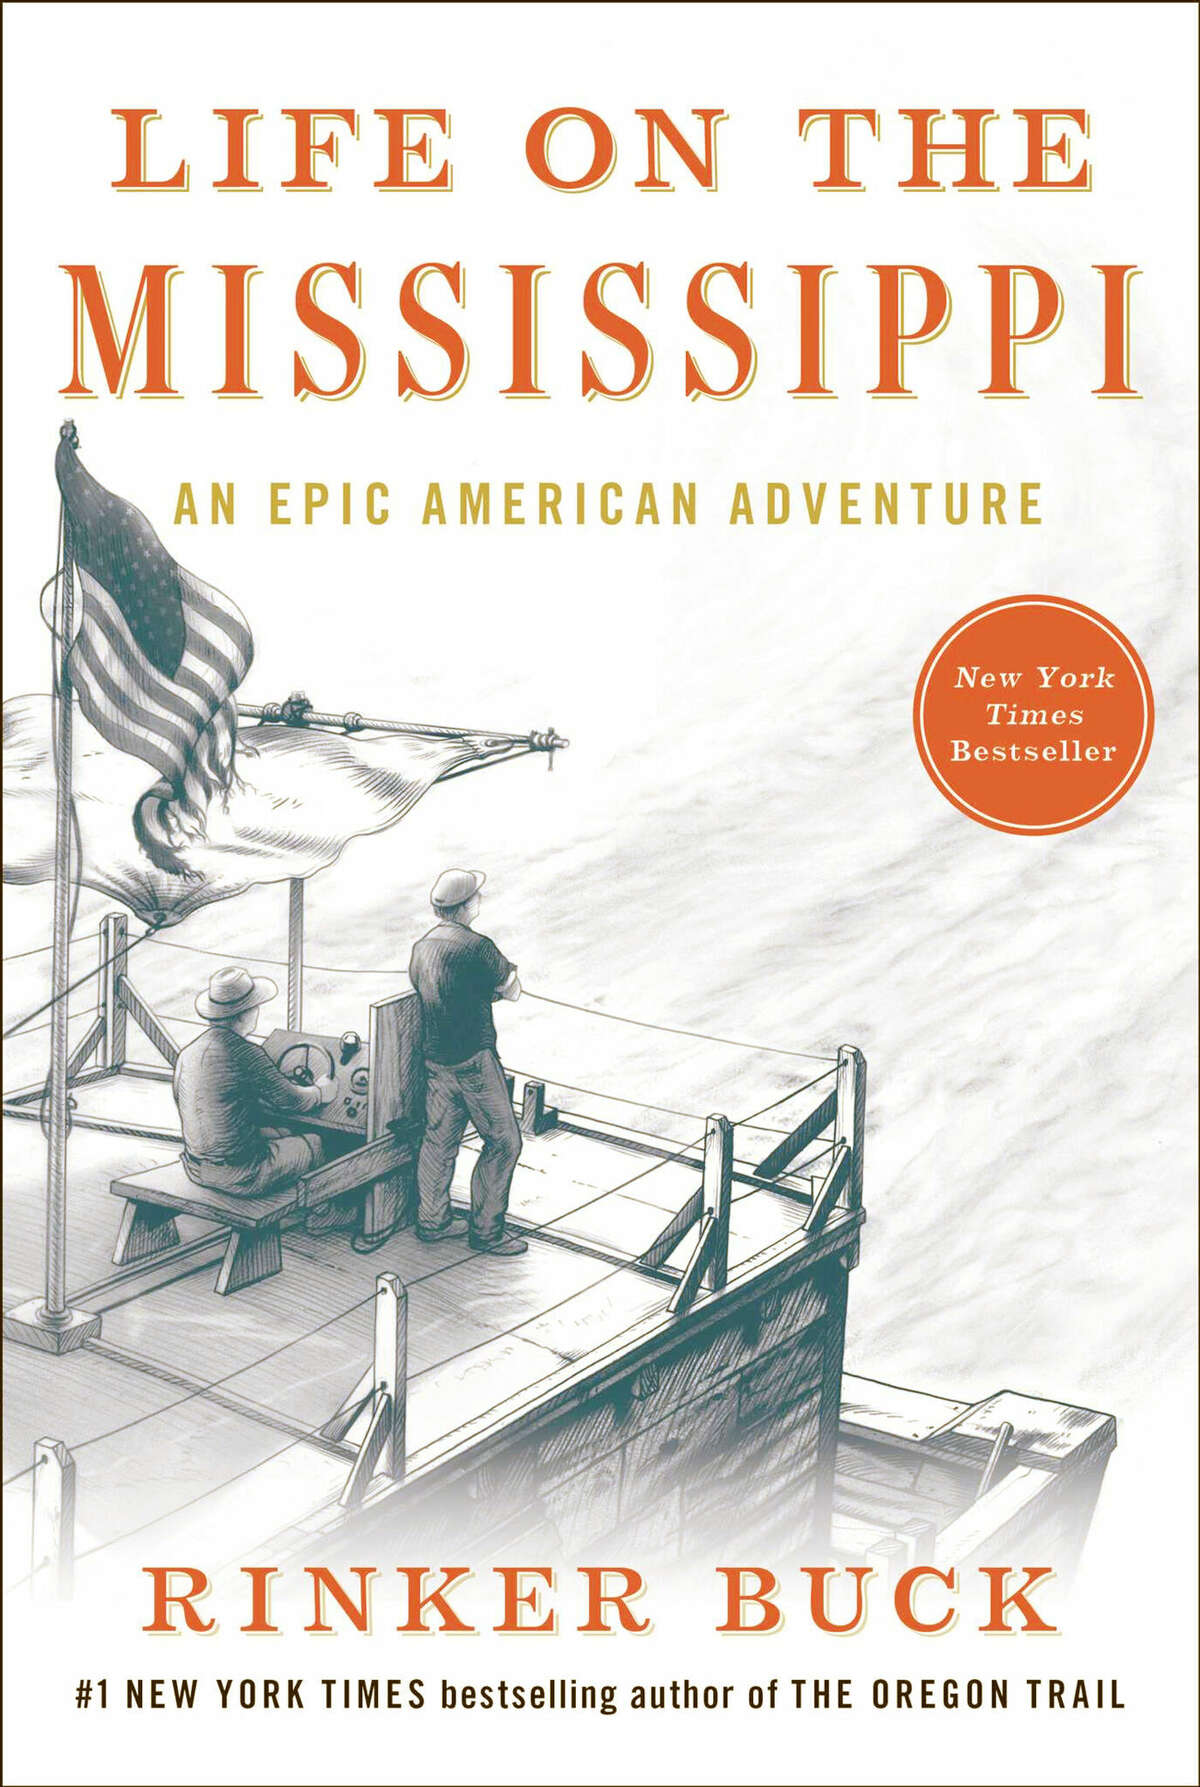 "Life on the Mississippi"